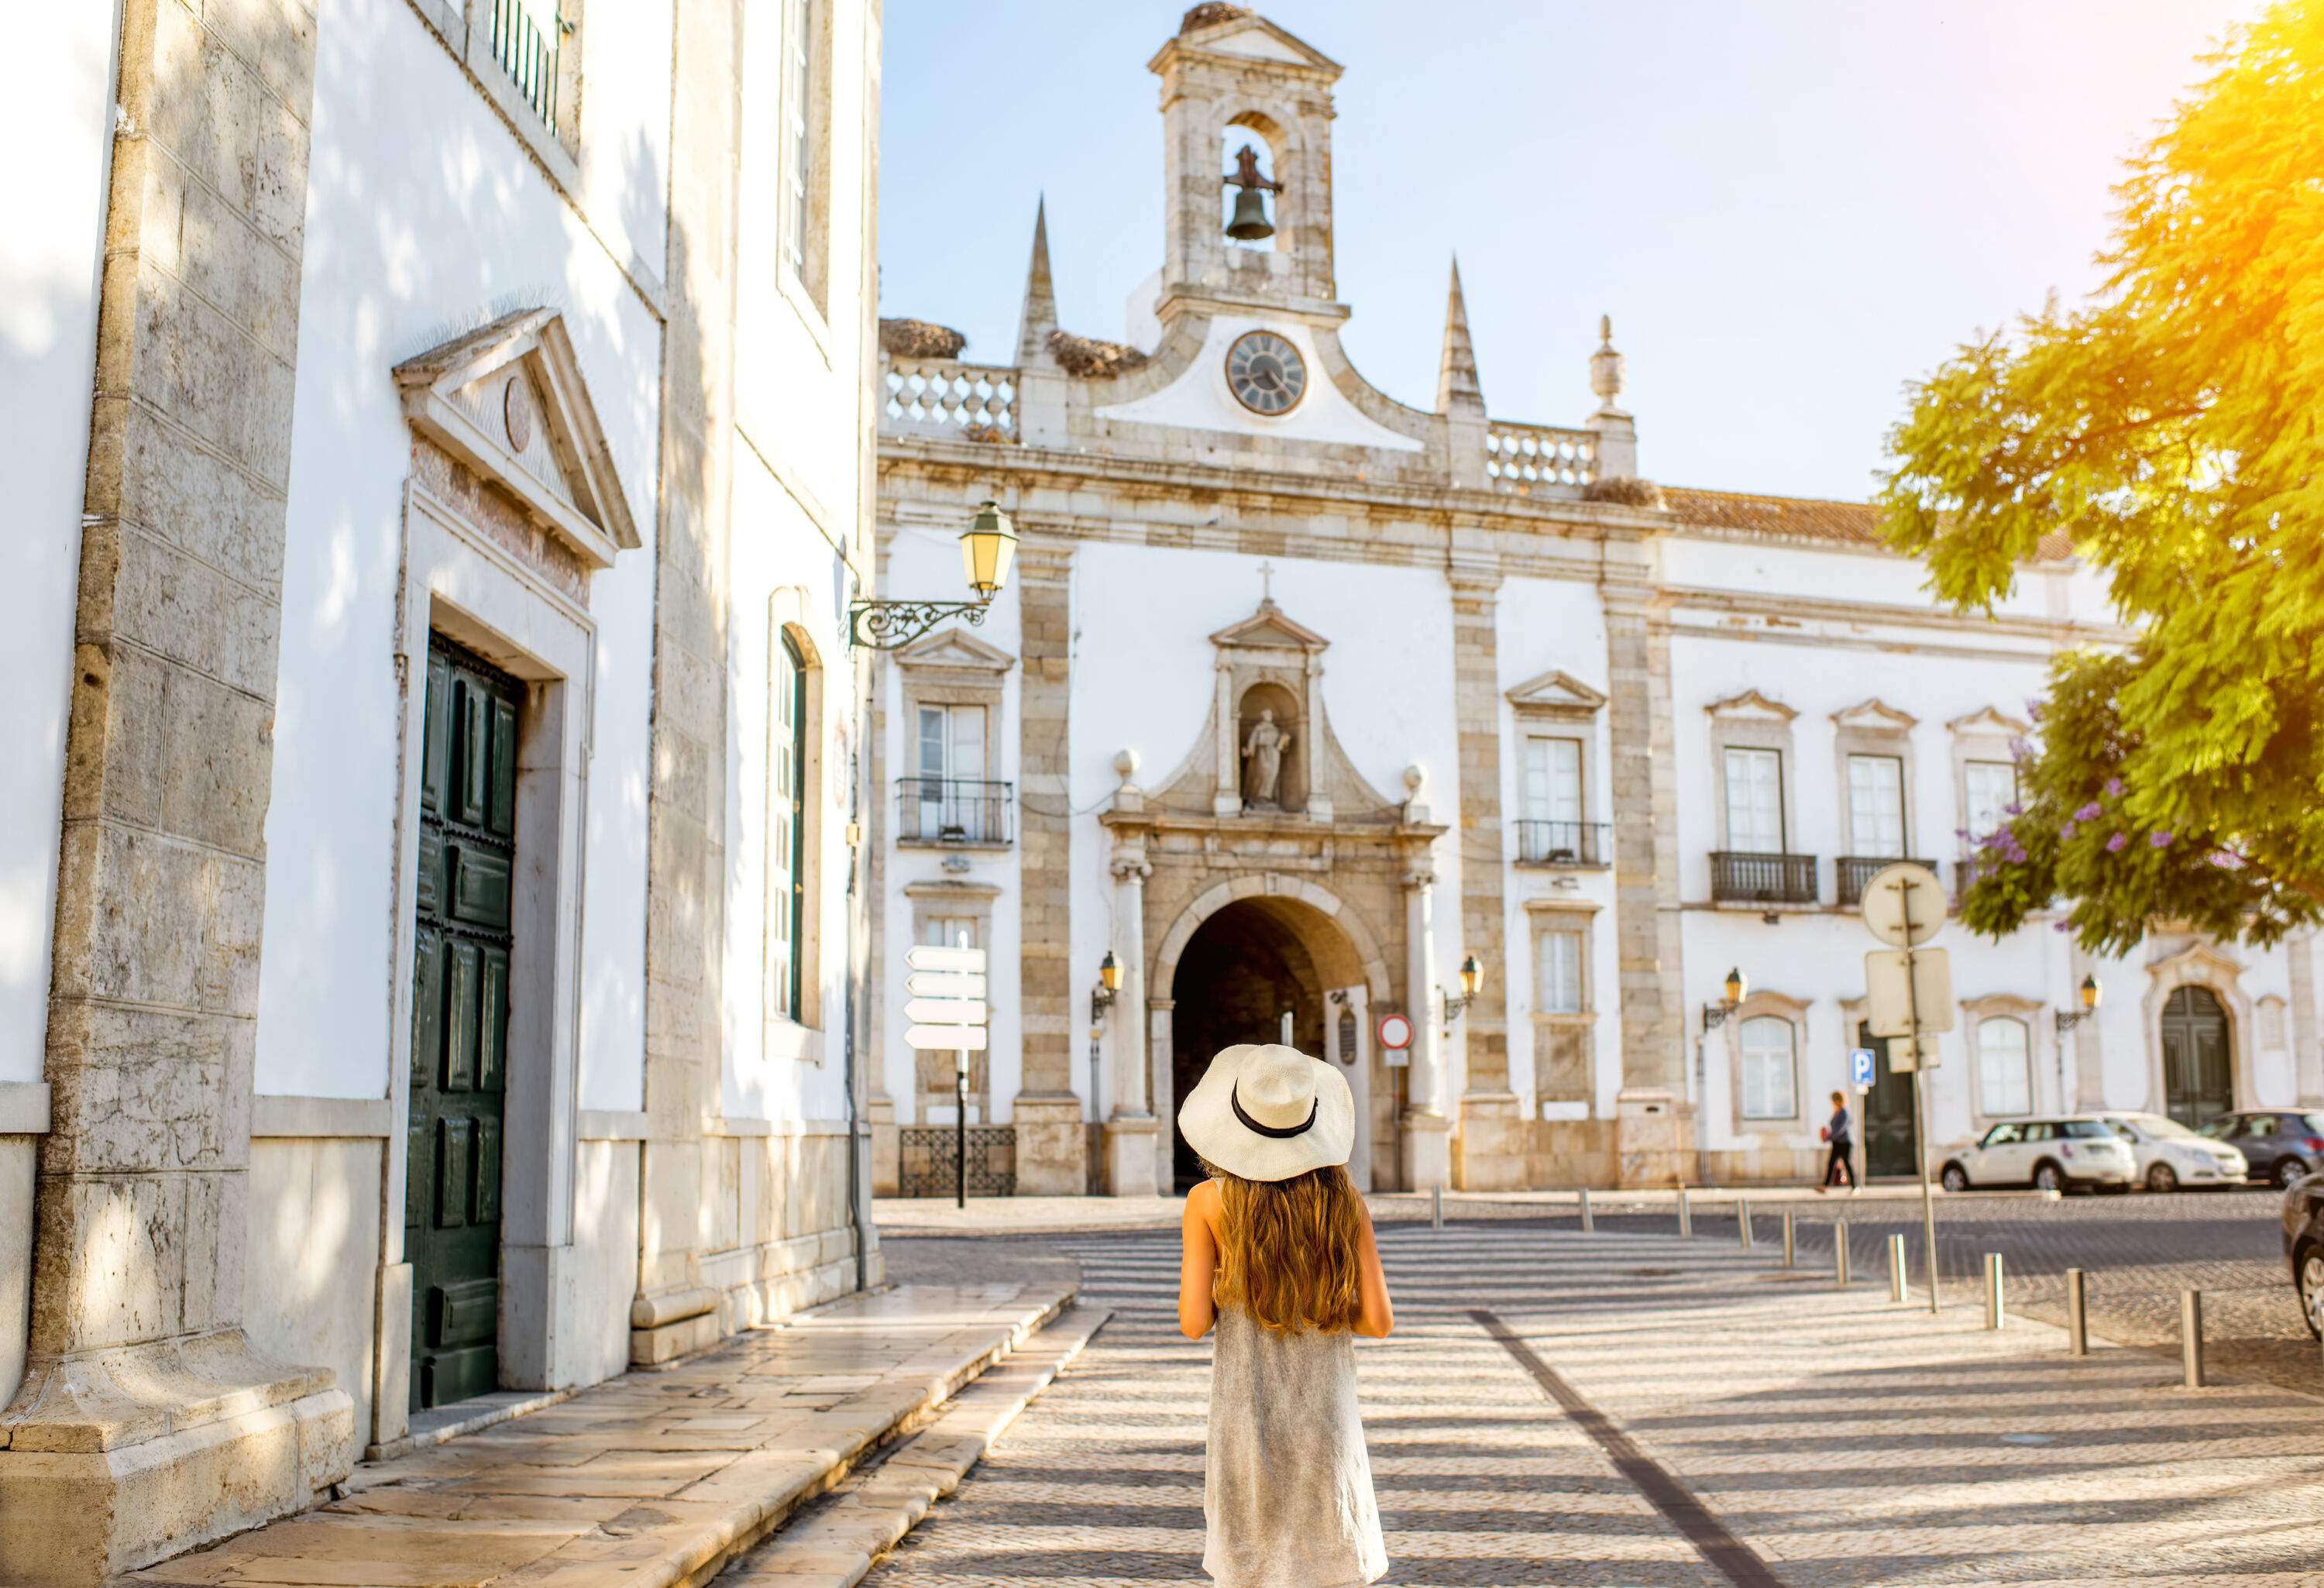 A young tourist stands confidently in front of an ancient church nestled within a city.